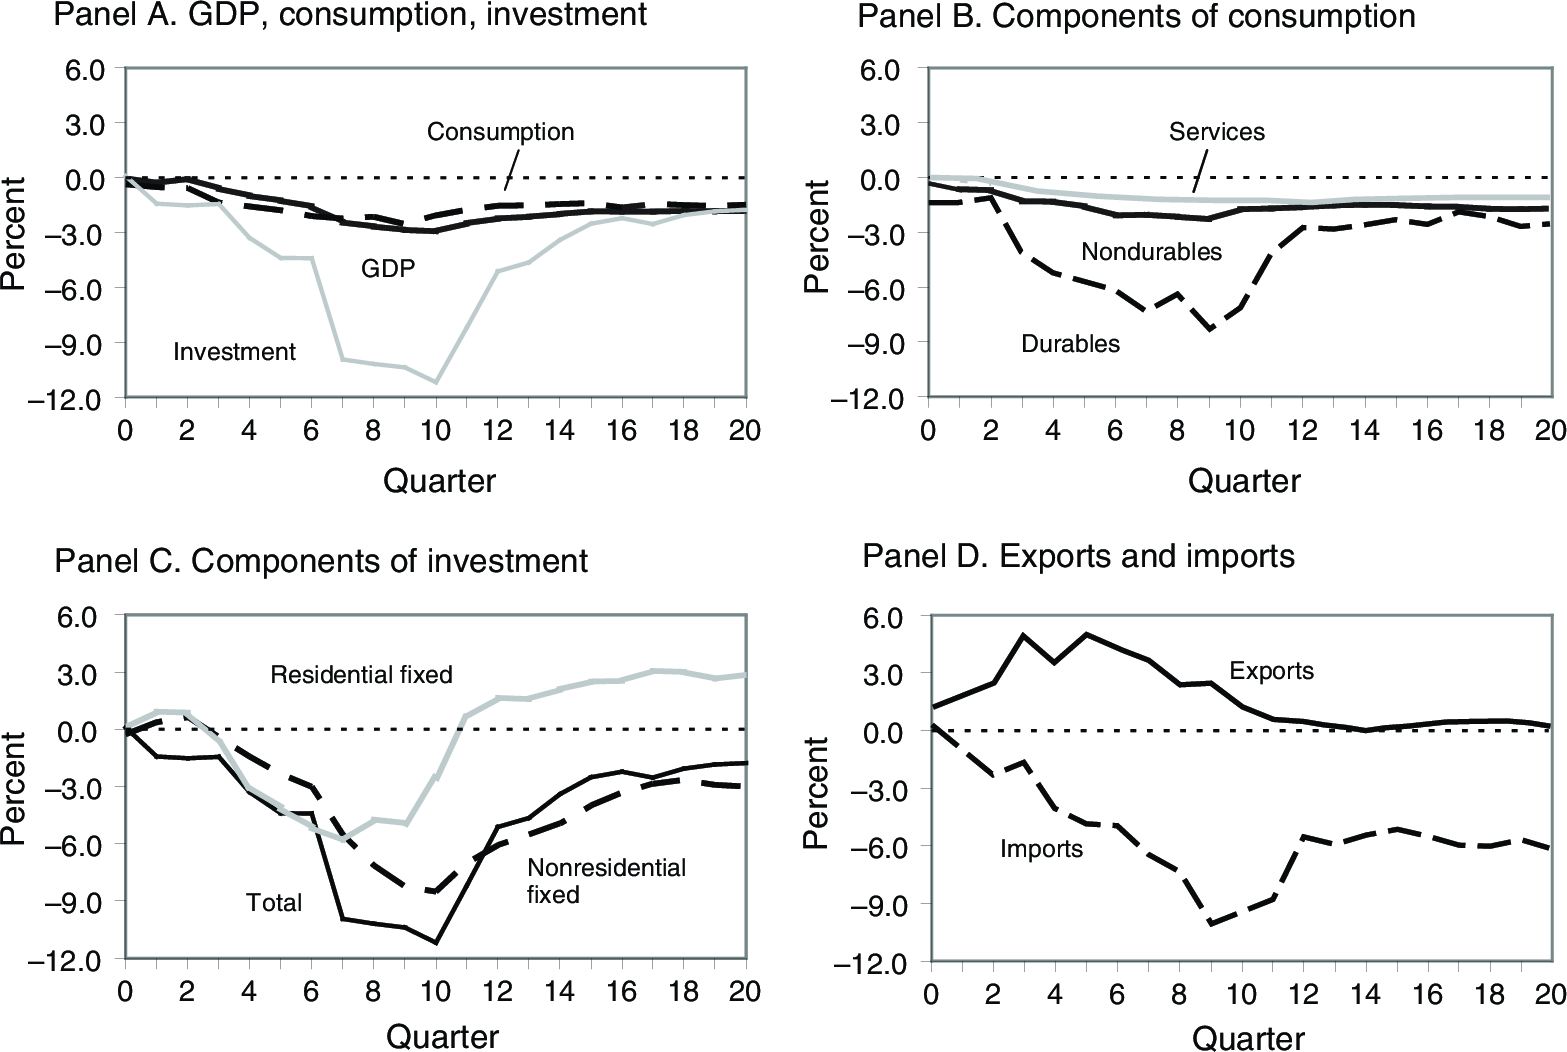 Impact on Individual Components of GDP of a 1% of GDP Aggregate Tax Increase. Source: Romer, Romer (2010).